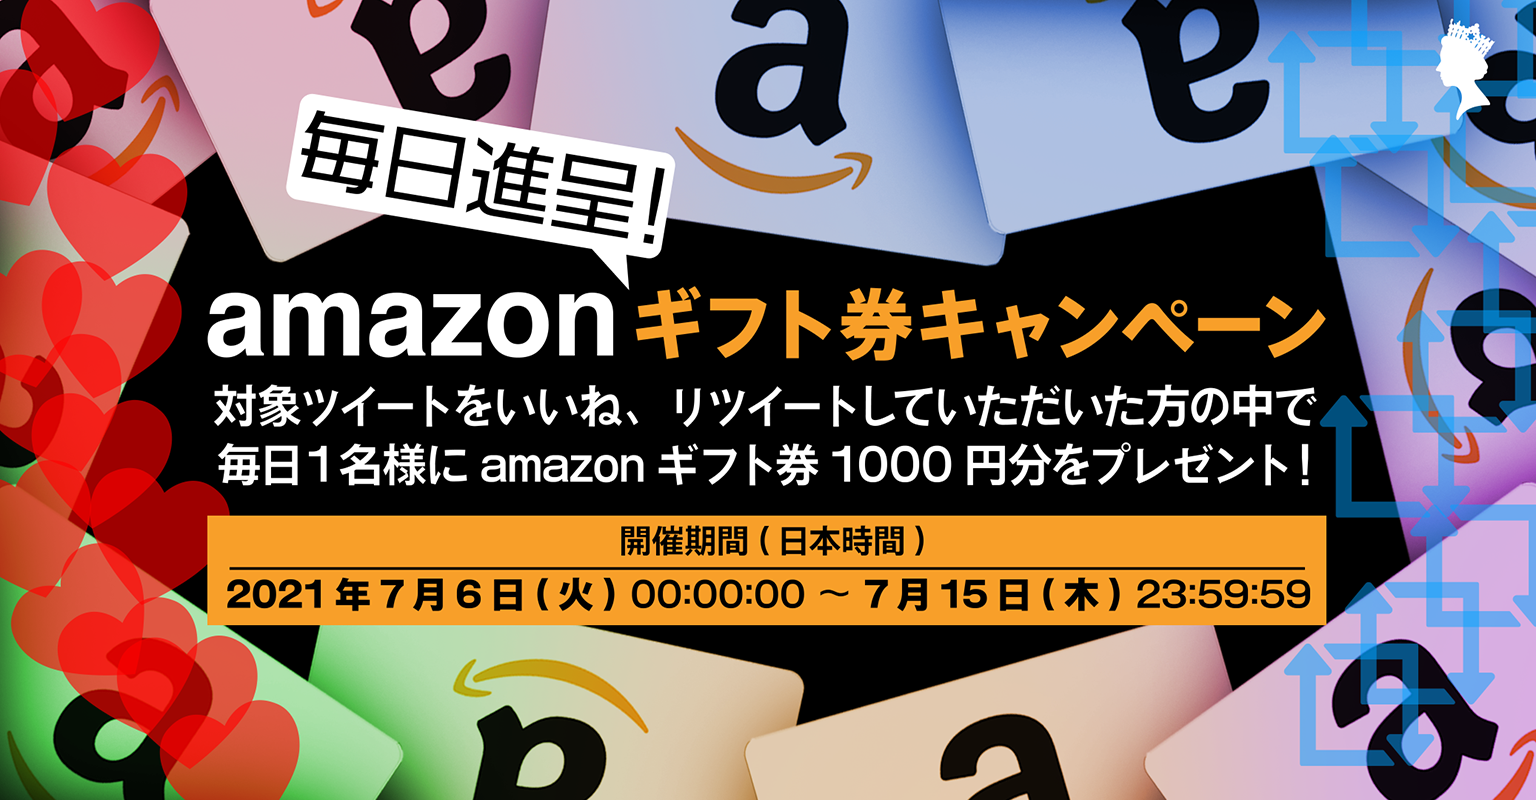 The big summer campaign is approaching at Queen Casino! Follow us on Twitter and receive an Amazon GC worth ¥1000 daily.